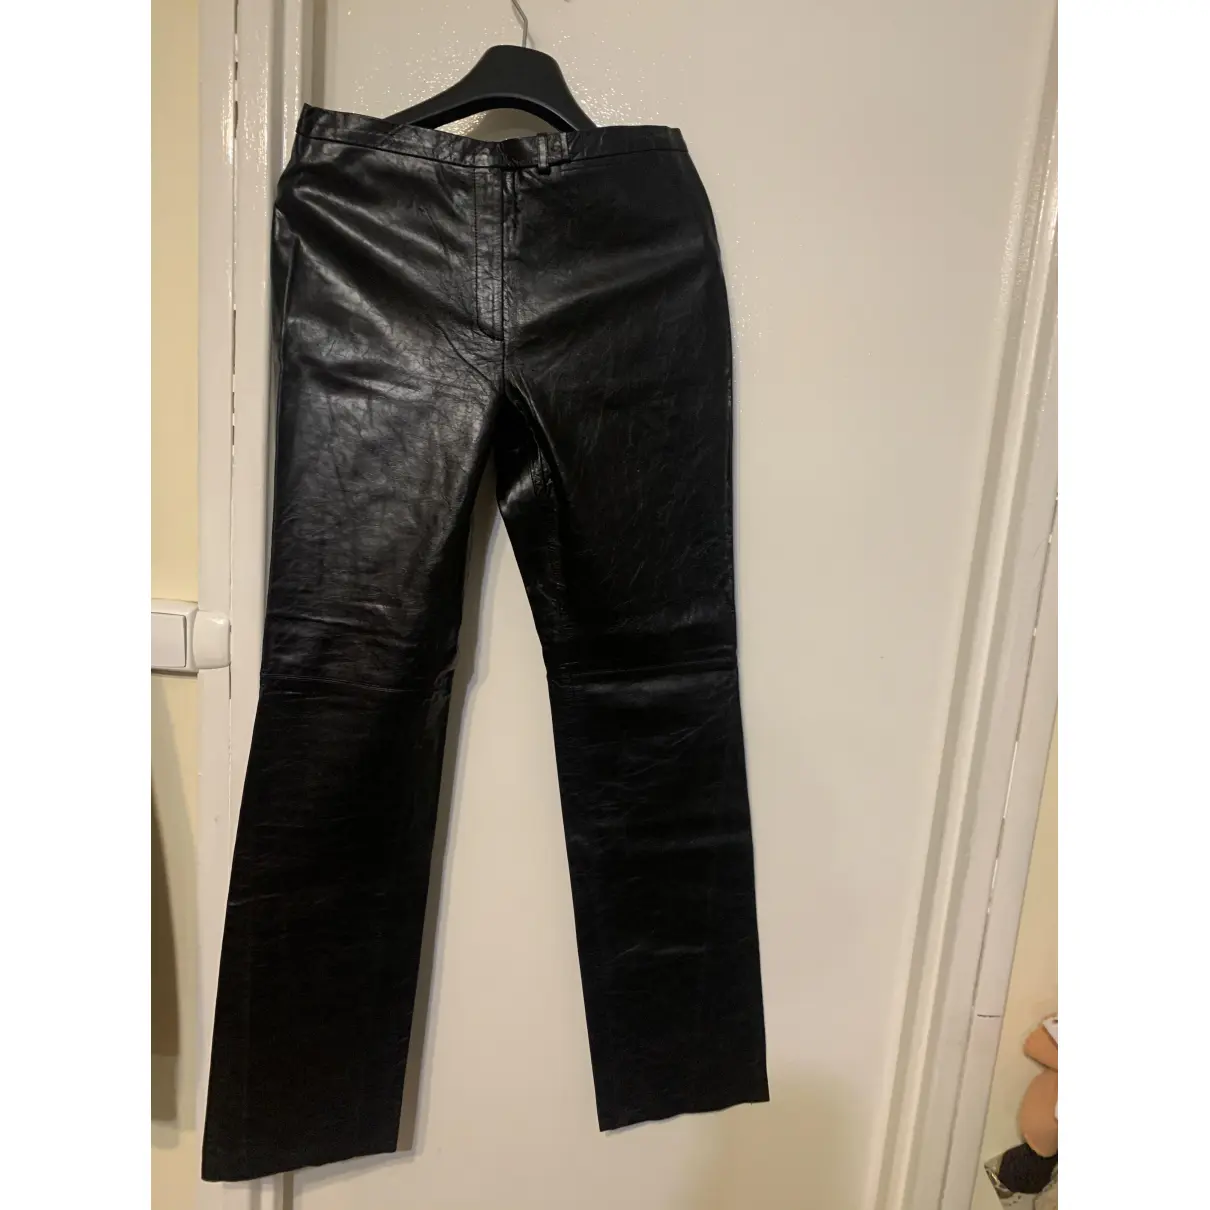 Buy Tatoosh Leather trousers online